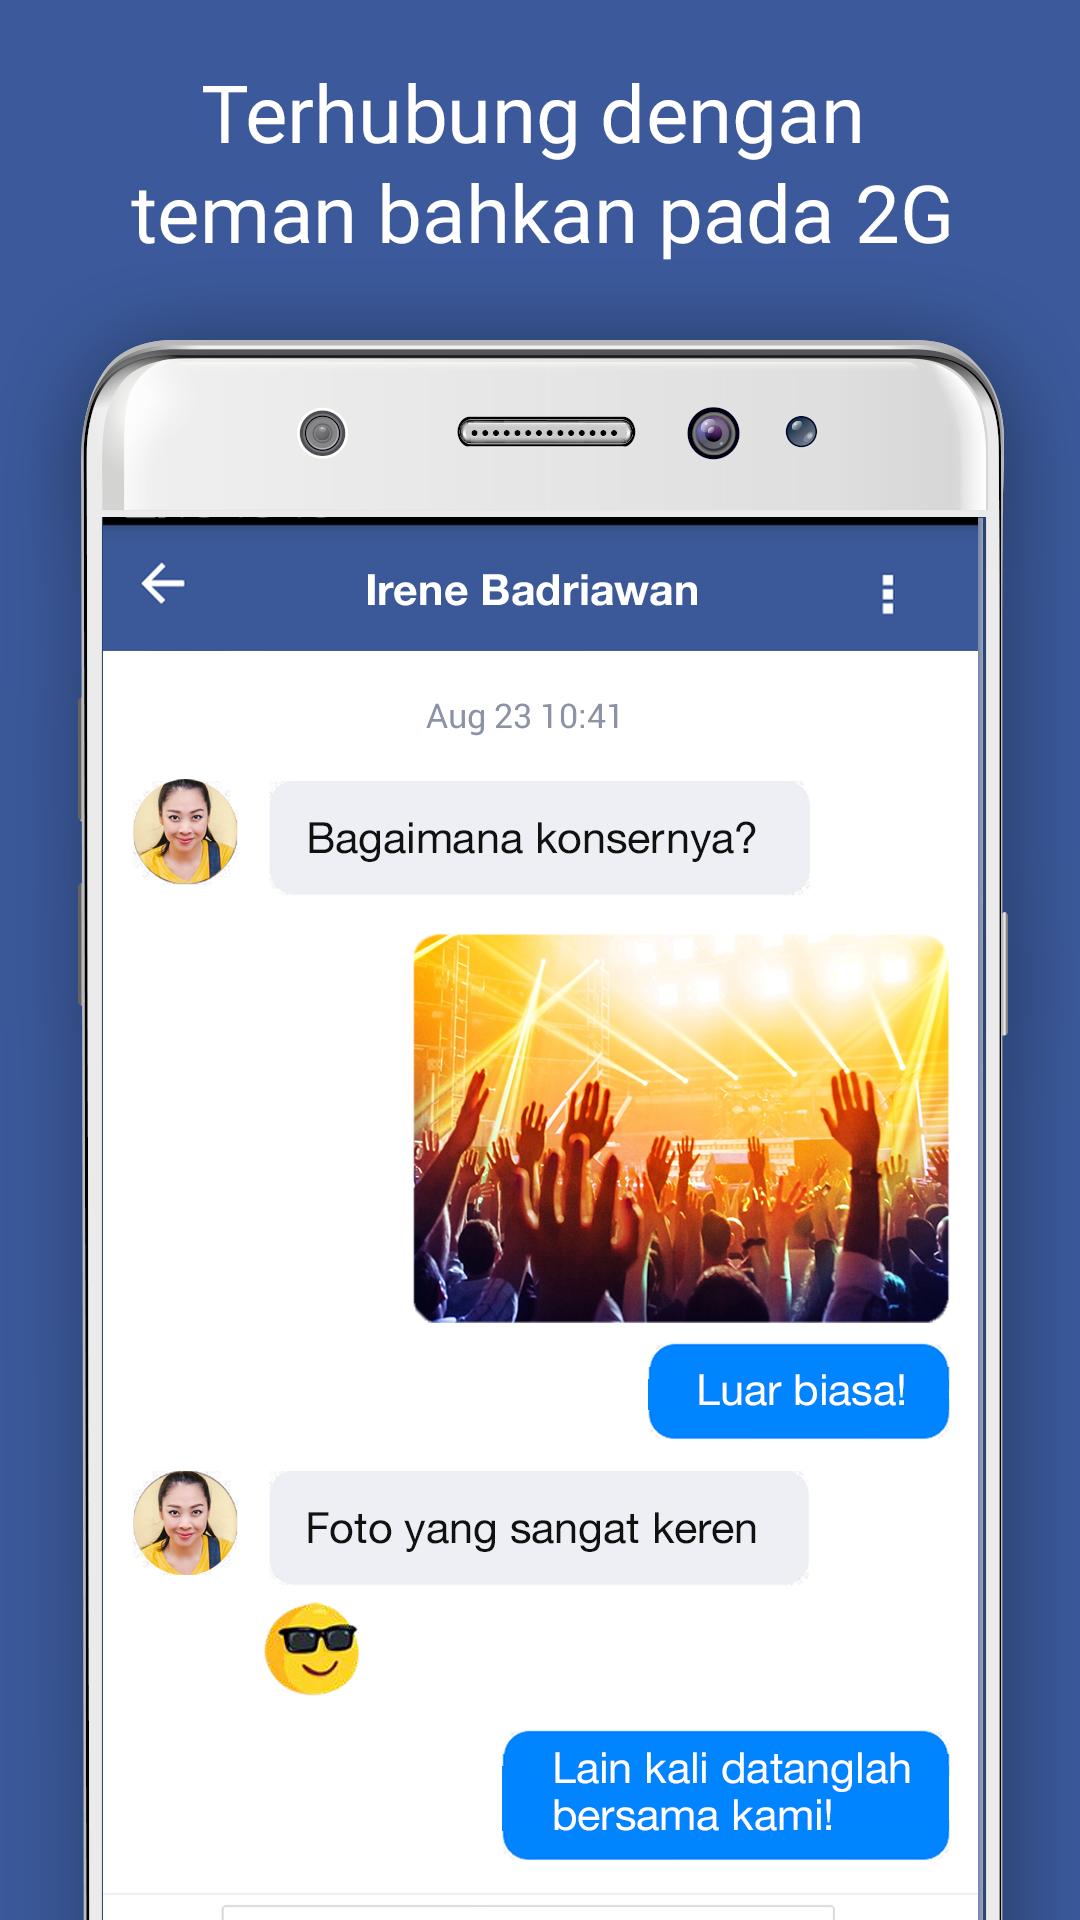 Facebook Lite APK 161.0.0.5.117 Download, never miss any single words